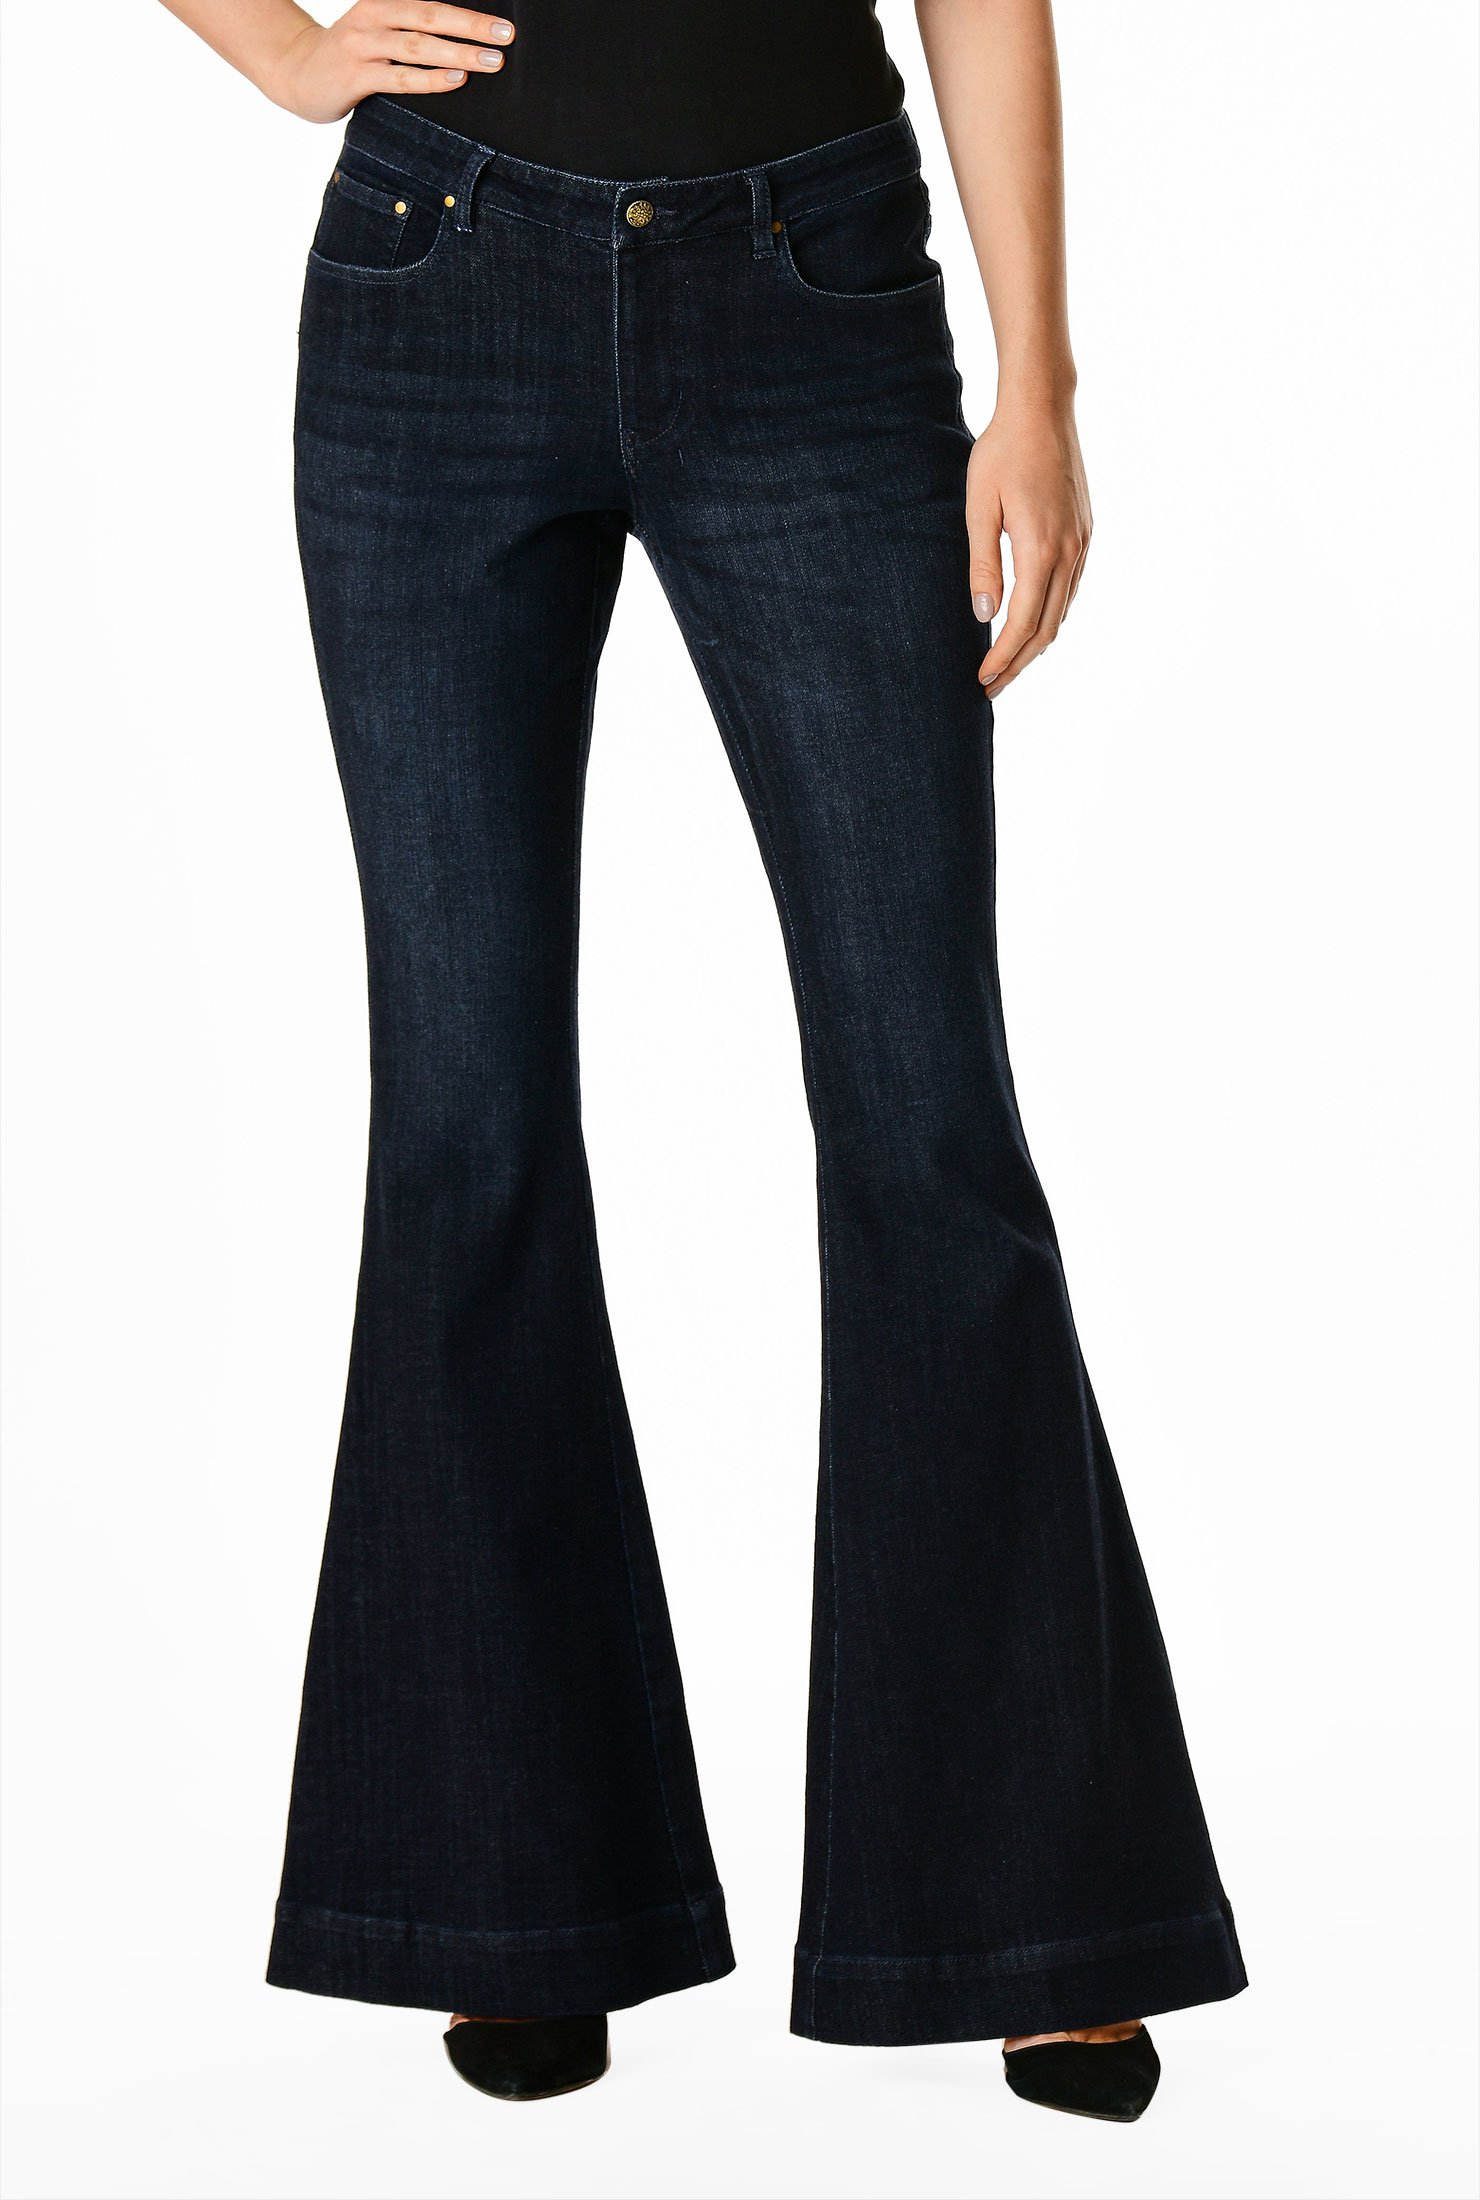 Express Studio Stretch Wide Waistband Flare Editor Pant, $79